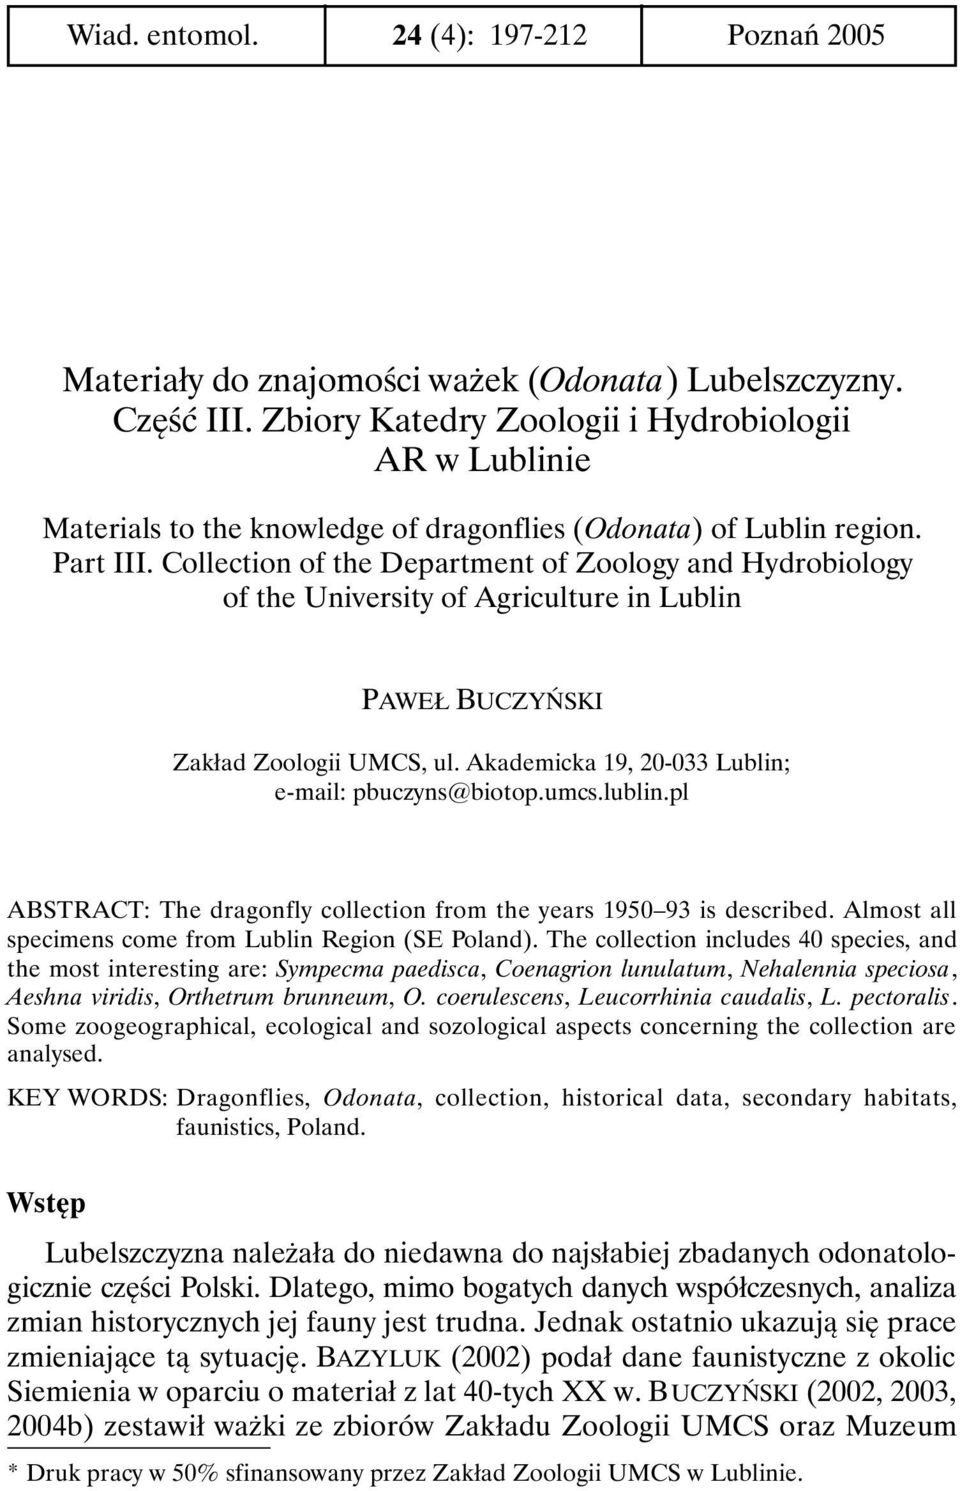 Collection of the Department of Zoology and Hydrobiology of the University of Agriculture in Lublin PAWEŁ BUCZYŃSKI Zakład Zoologii UMCS, ul. Akademicka 19, 20-033 Lublin; e-mail: pbuczyns@biotop.